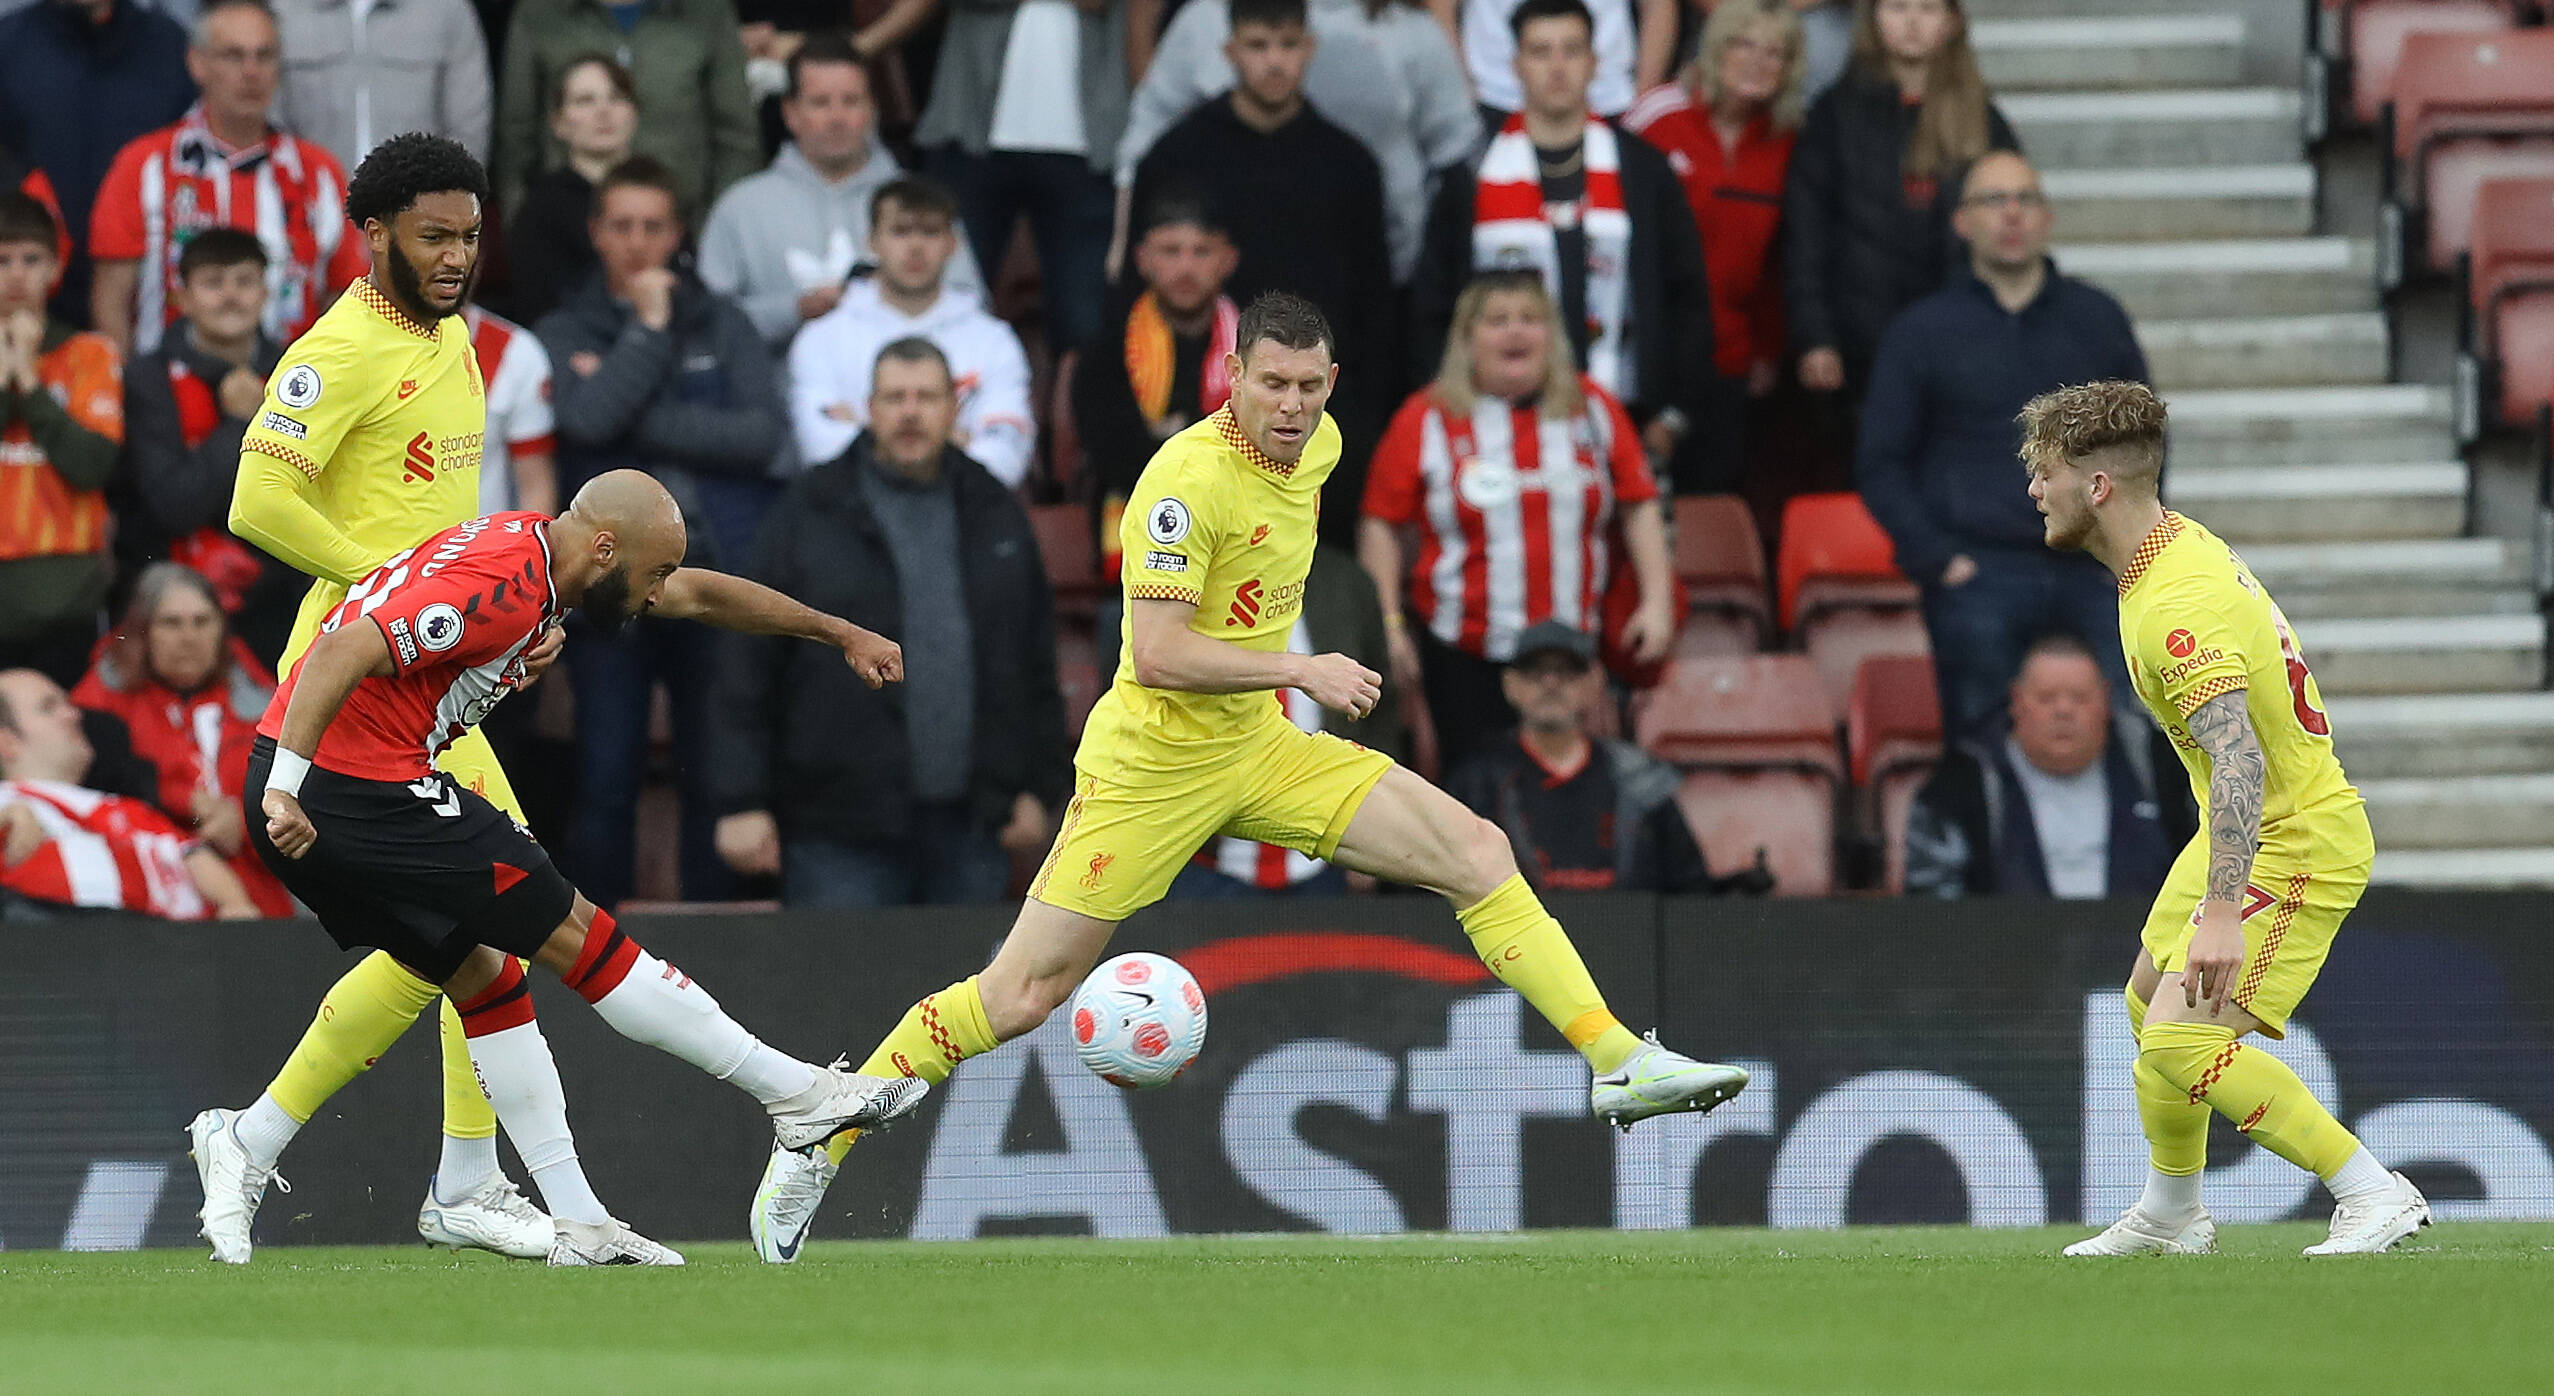 Nathan Redmond fires Southampton into the lead